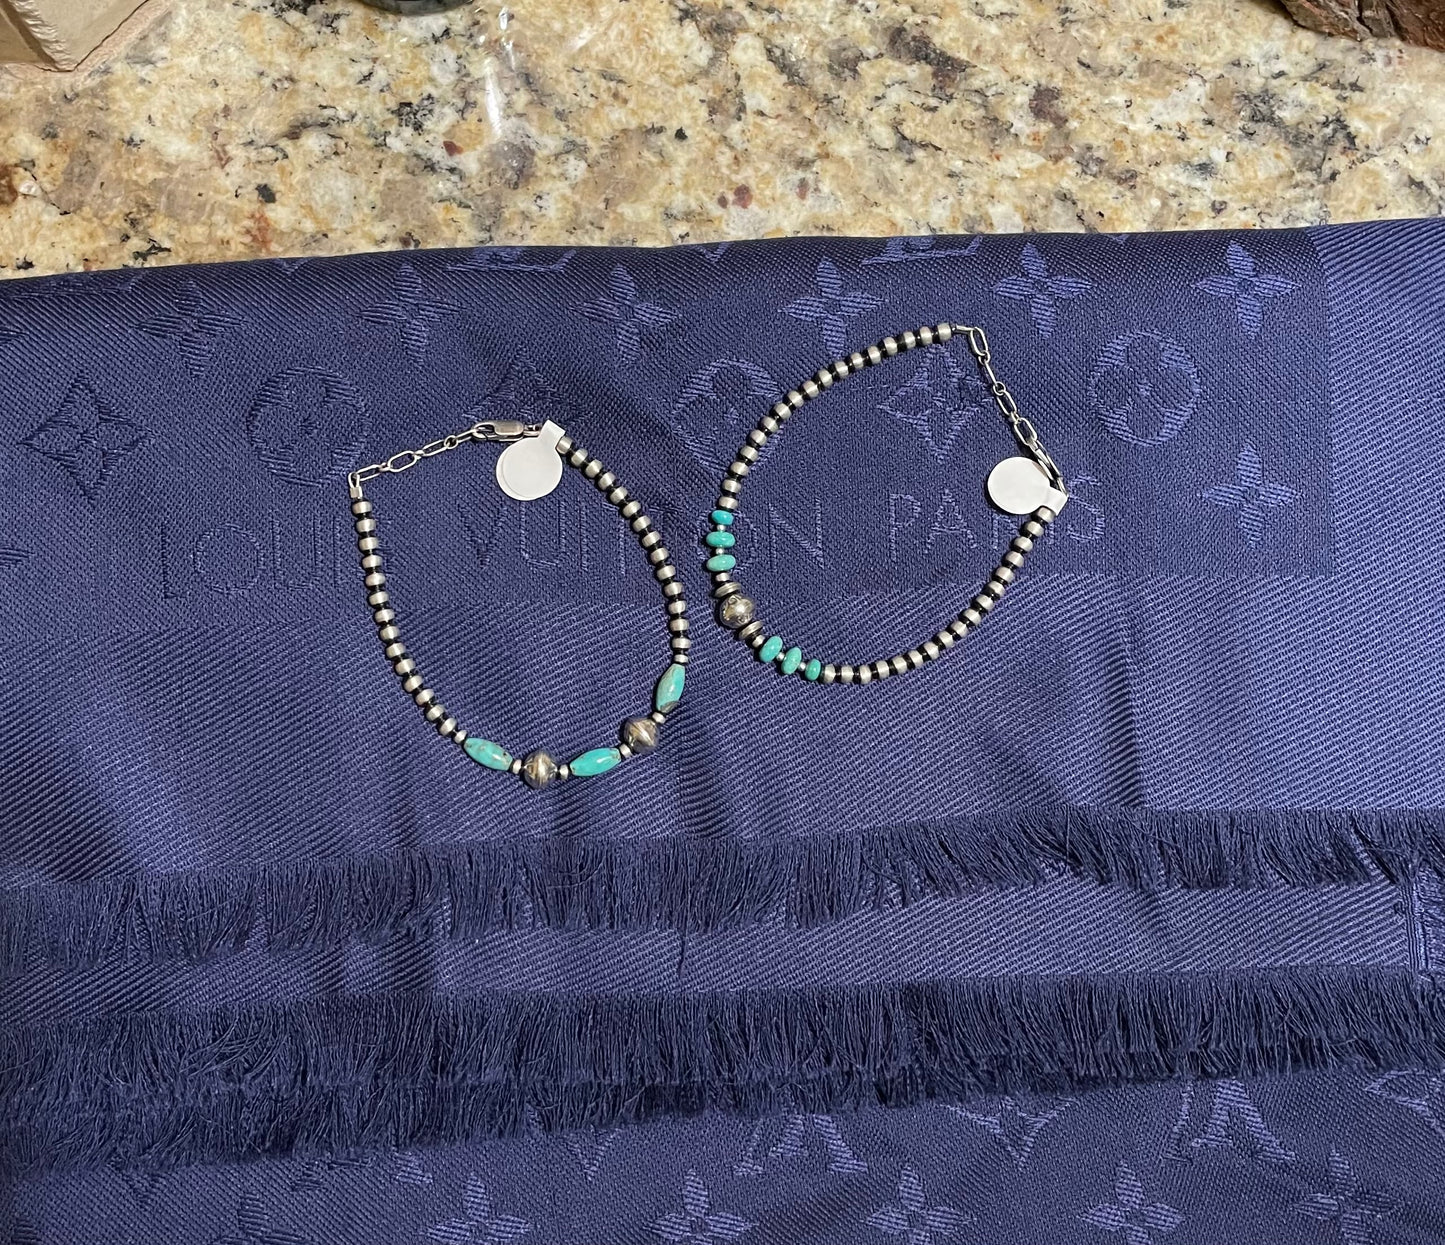 The Navajo Pearl Bracelets with Turquoise